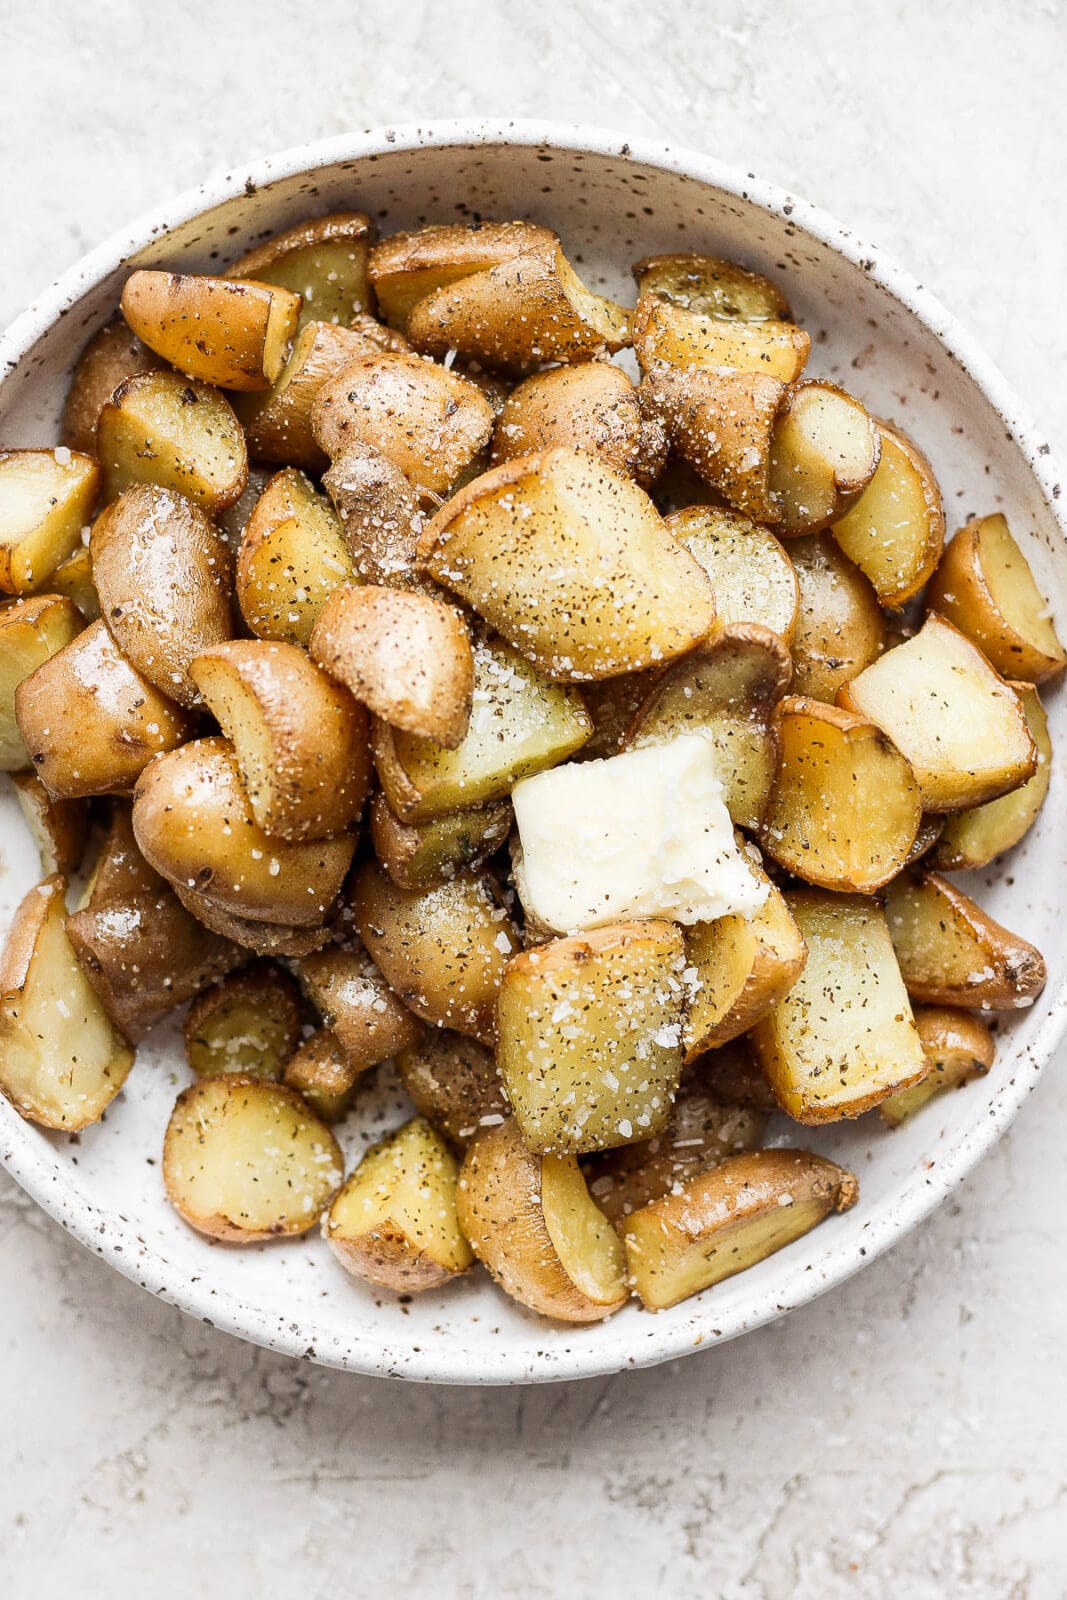 Smoked potatoes in a bowl with butter.